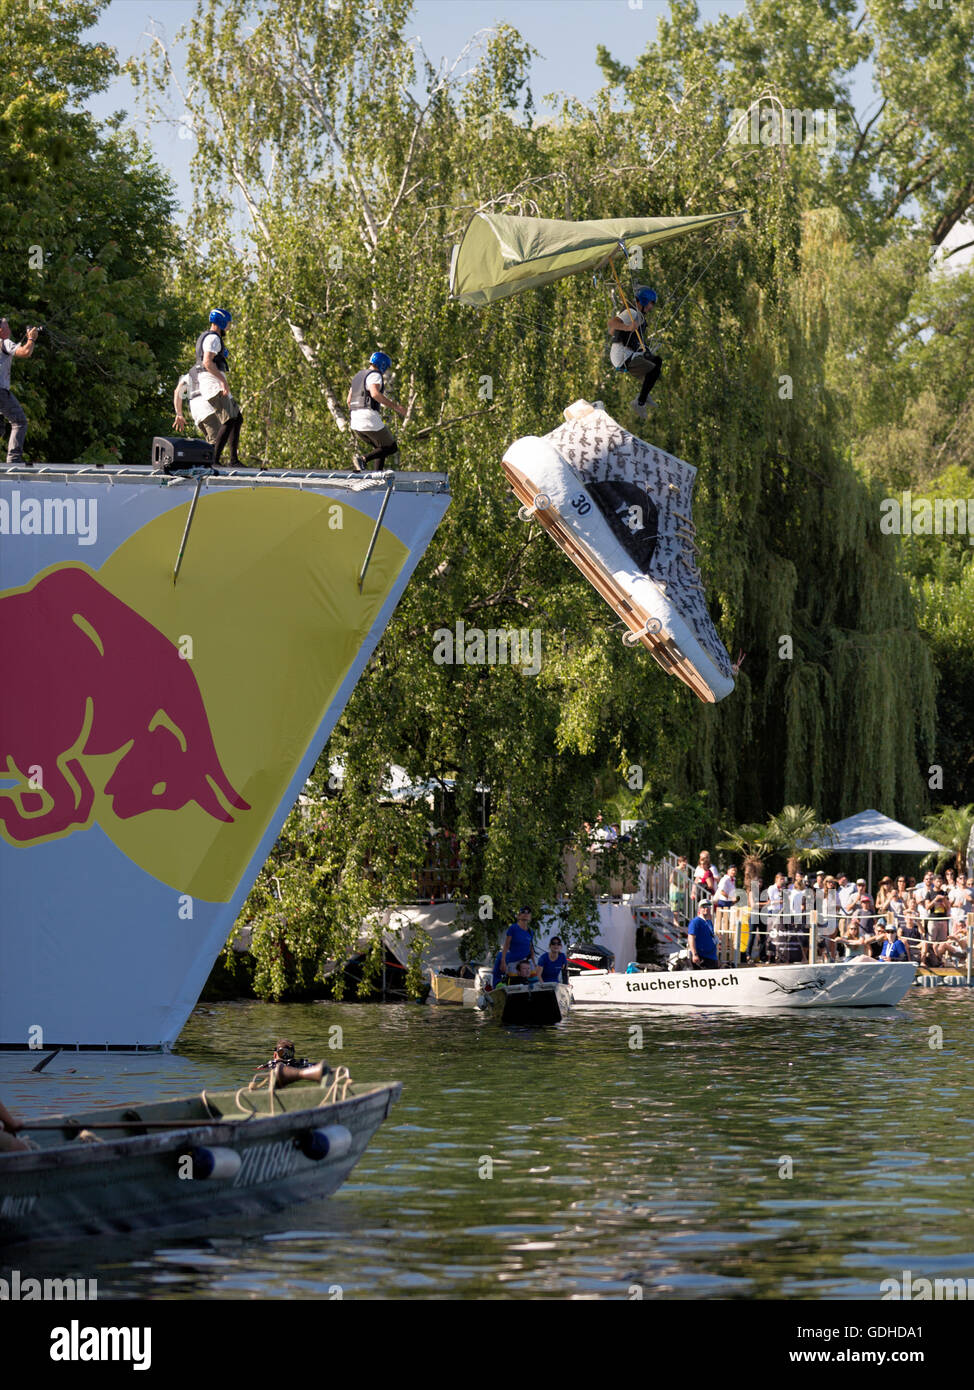 Zuerich, Switzerland. 16th July, 2016. The team "Kanye West's Yeezy Boost  350" pushing their flying vehicle over the ramp at Red Bull Flugtag in  Zuerich, Switzerland. Credit: Carsten Reisinger/Alamy Live News Stock